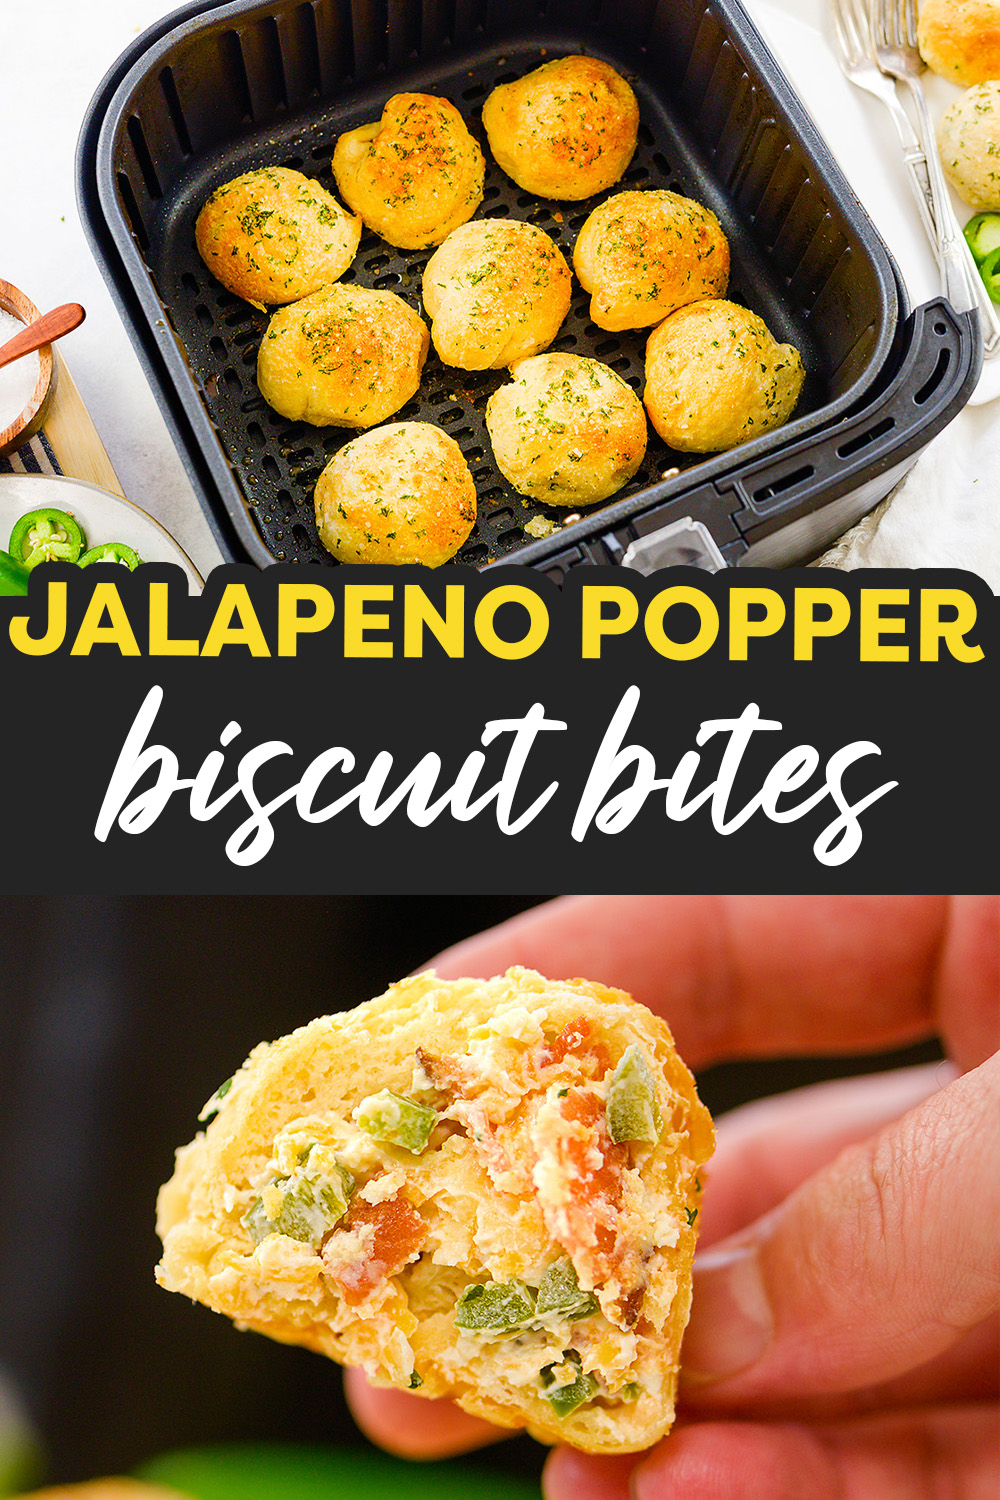 These jalapeno popper bites take the lovely popper and surround it an air fried biscuit.  Then we seasoned the biscuit for even more flavor!  This is a top notch appetizer!